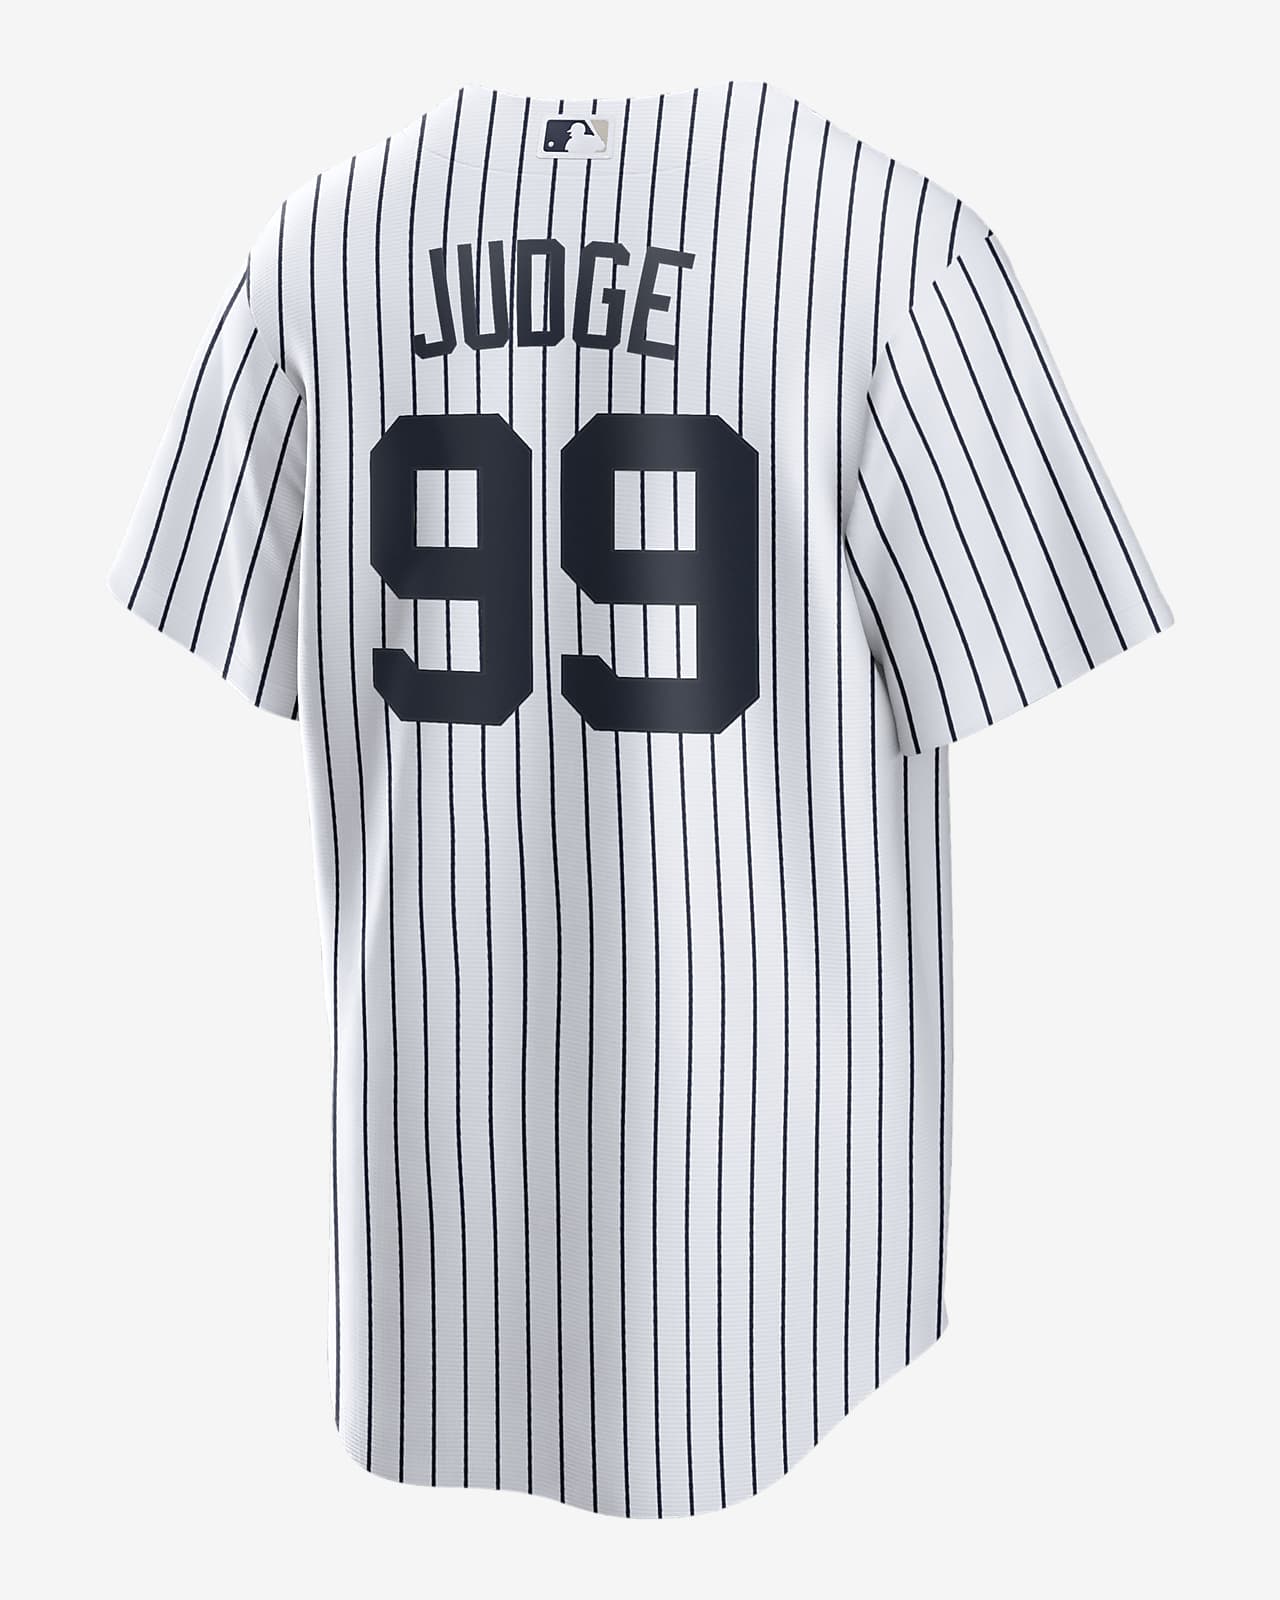 aaron judge stitched jersey